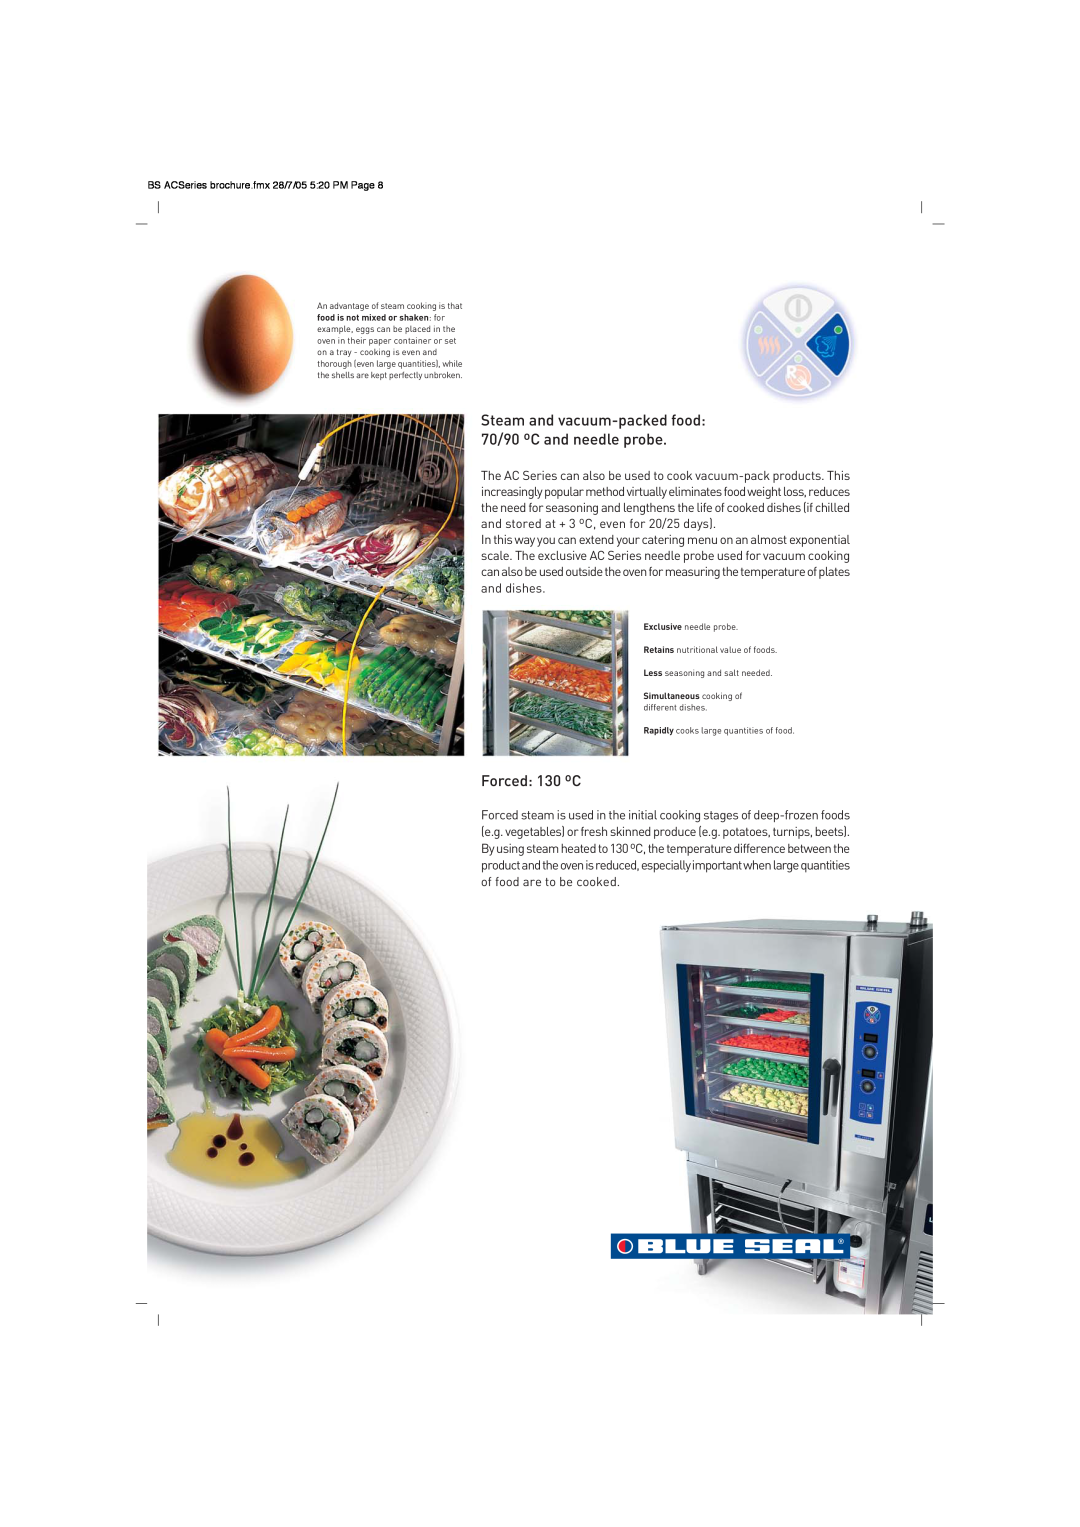 Moffat AC Series brochure Steam and vacuum-packed food 70/90 ºC and needle probe, Forced 130 ºC 